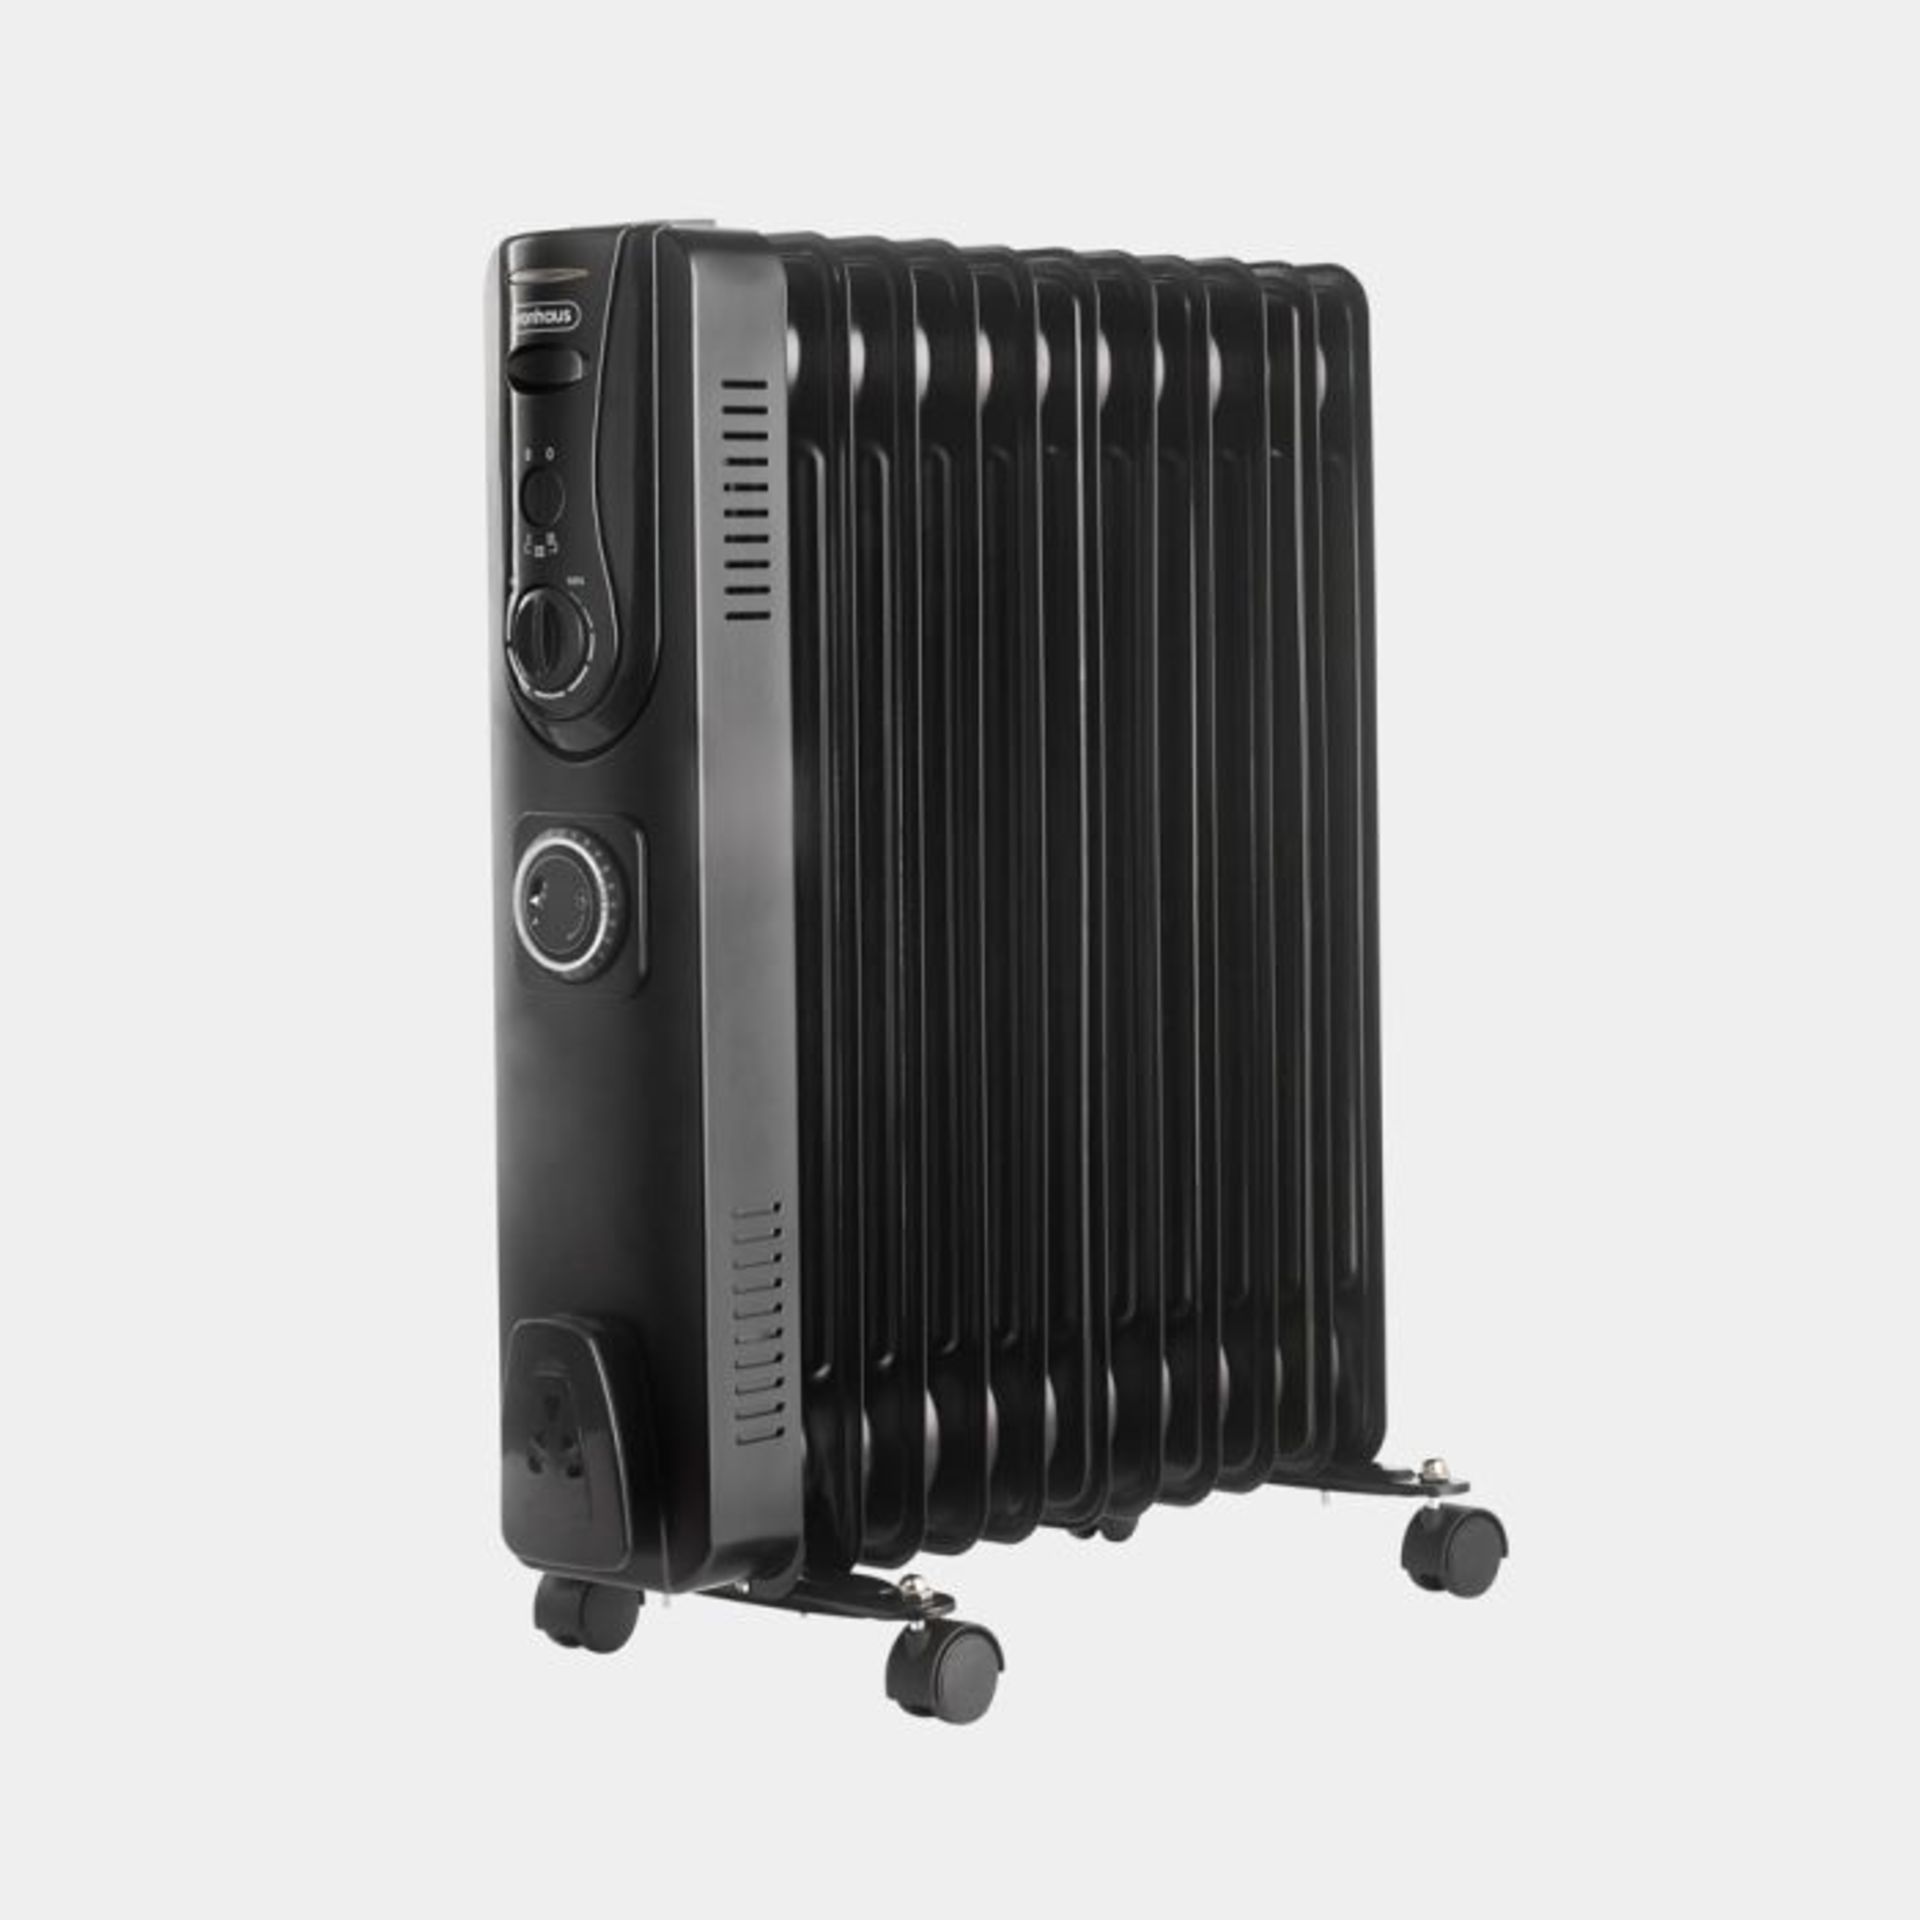 11 Fin 2500W Oil Filled Radiator - Black. -- S2.6 A stylish, cost-effective way to keep warm this